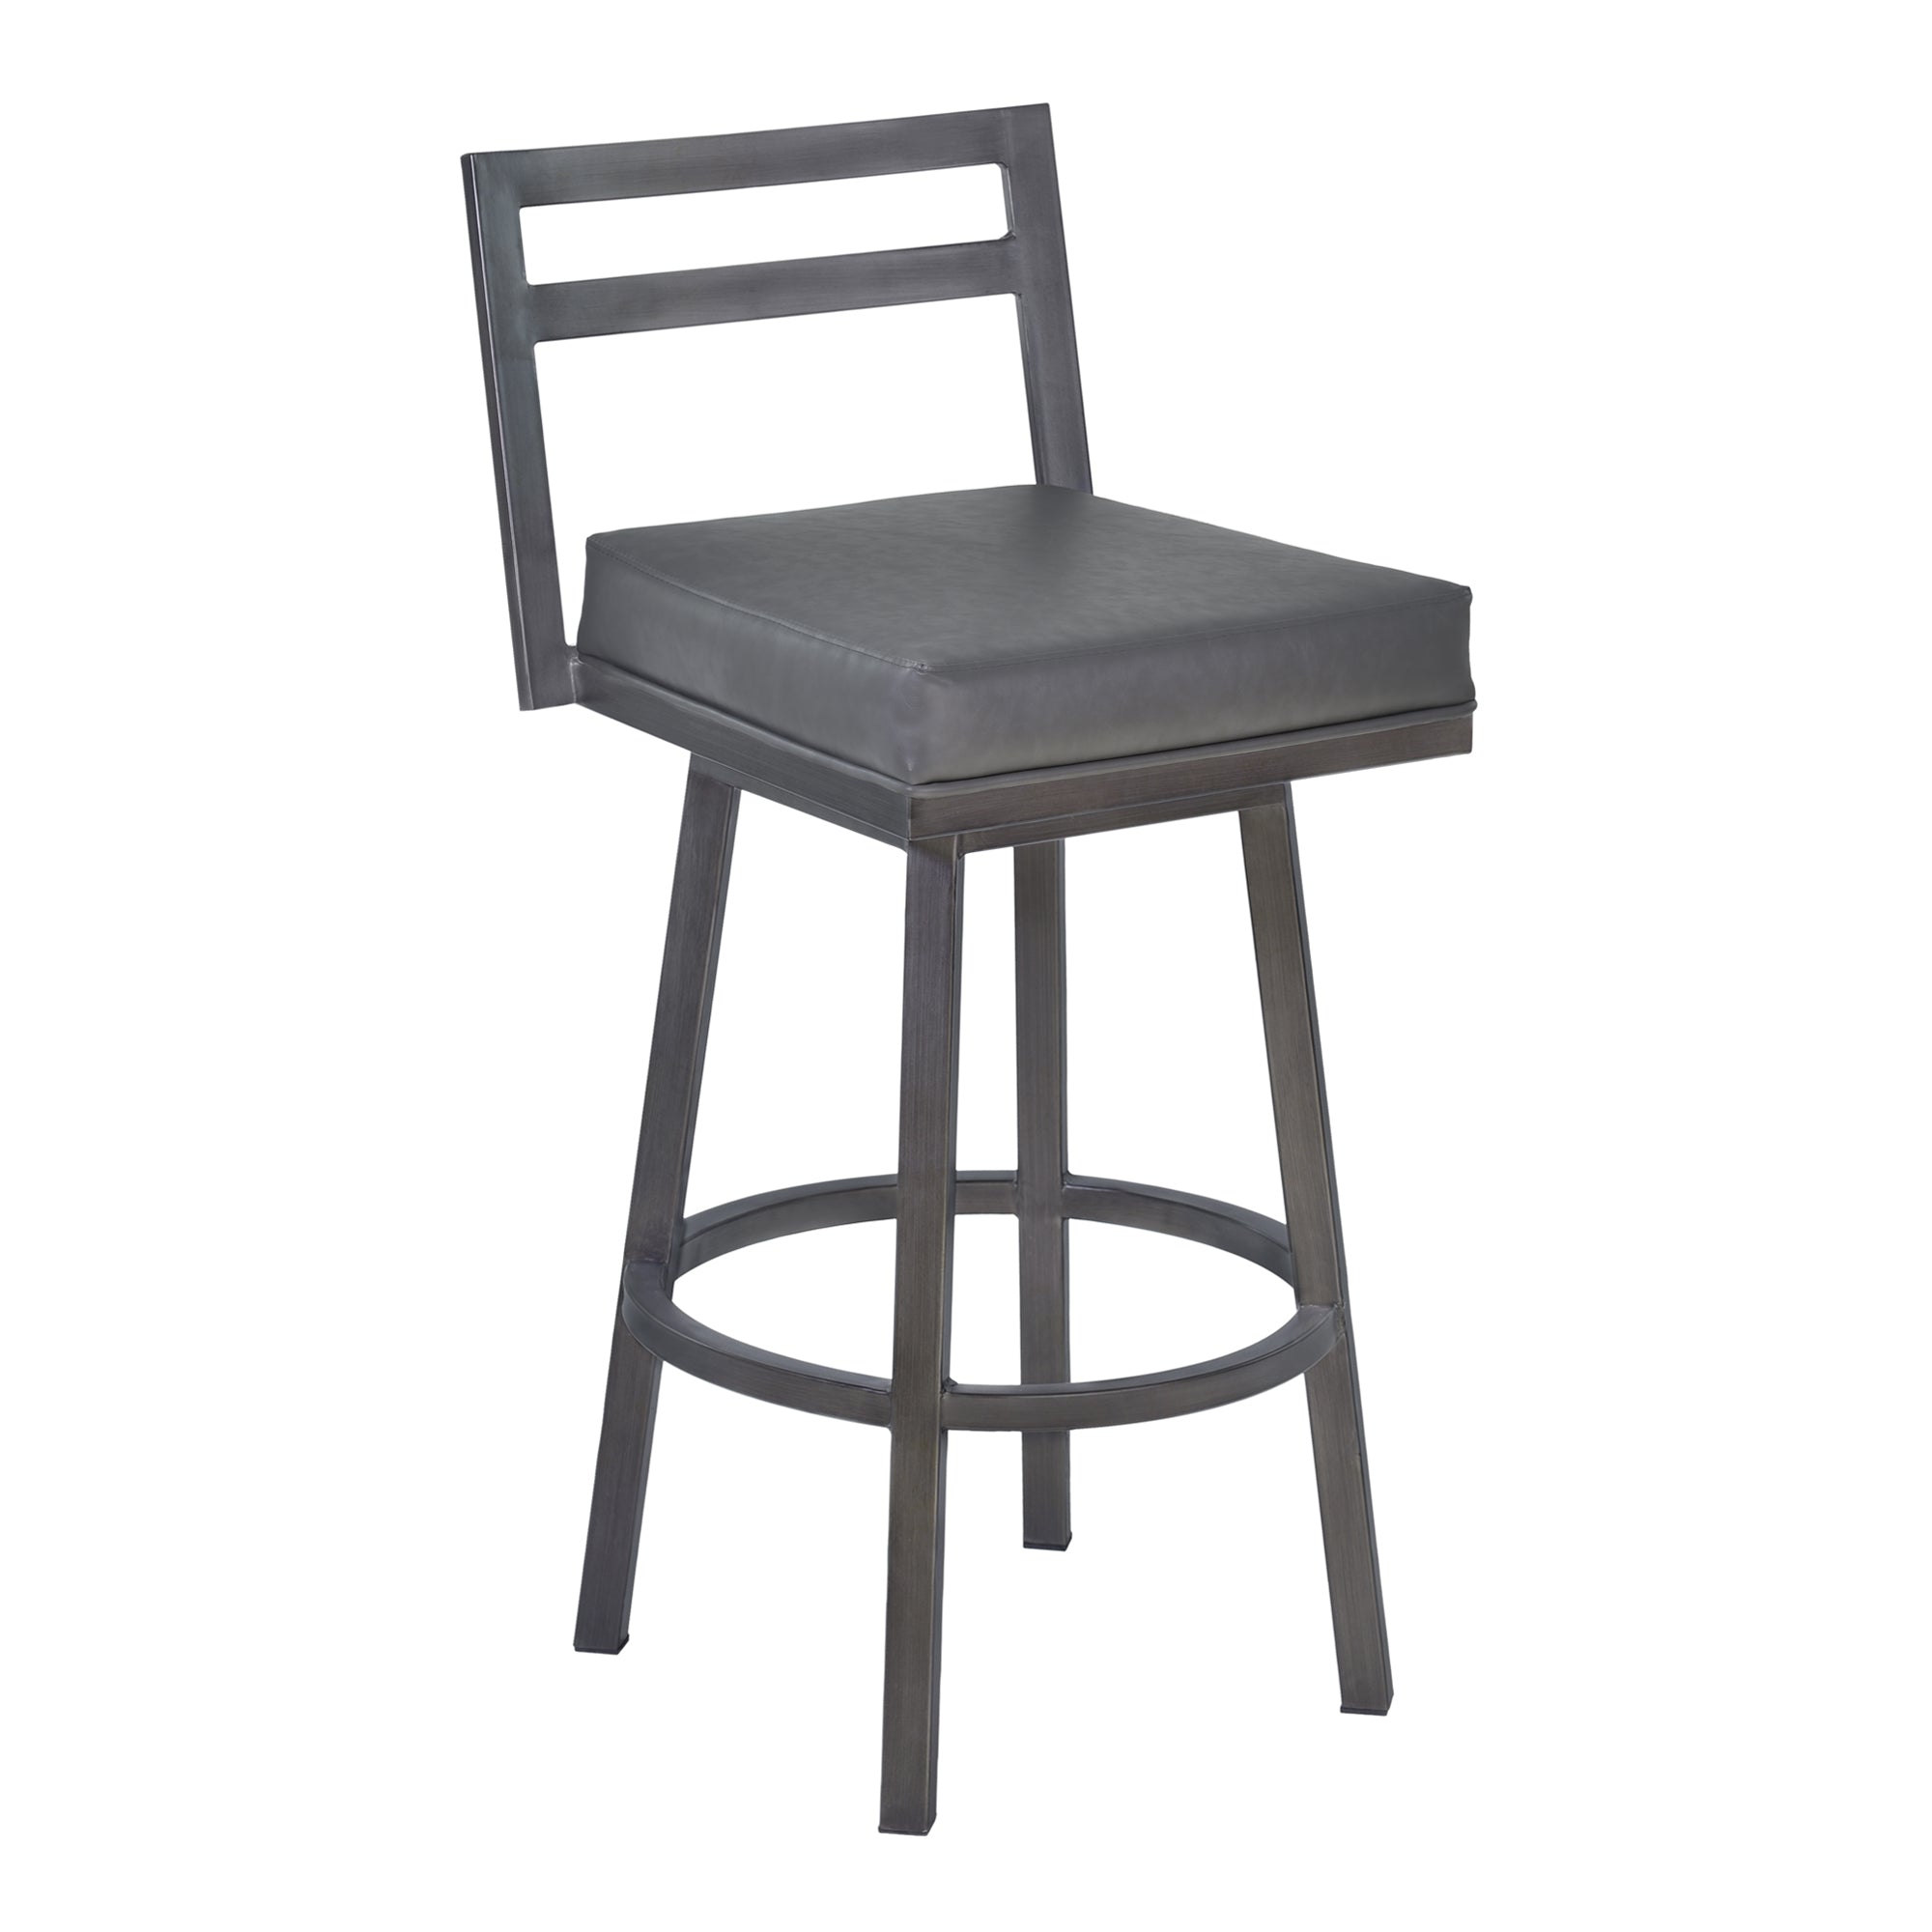 Armen Living Lcmobavg26 Moniq 26" Counter Height Metal Swivel Barstool In Vintage Grey Faux Leather And Mineral Finish